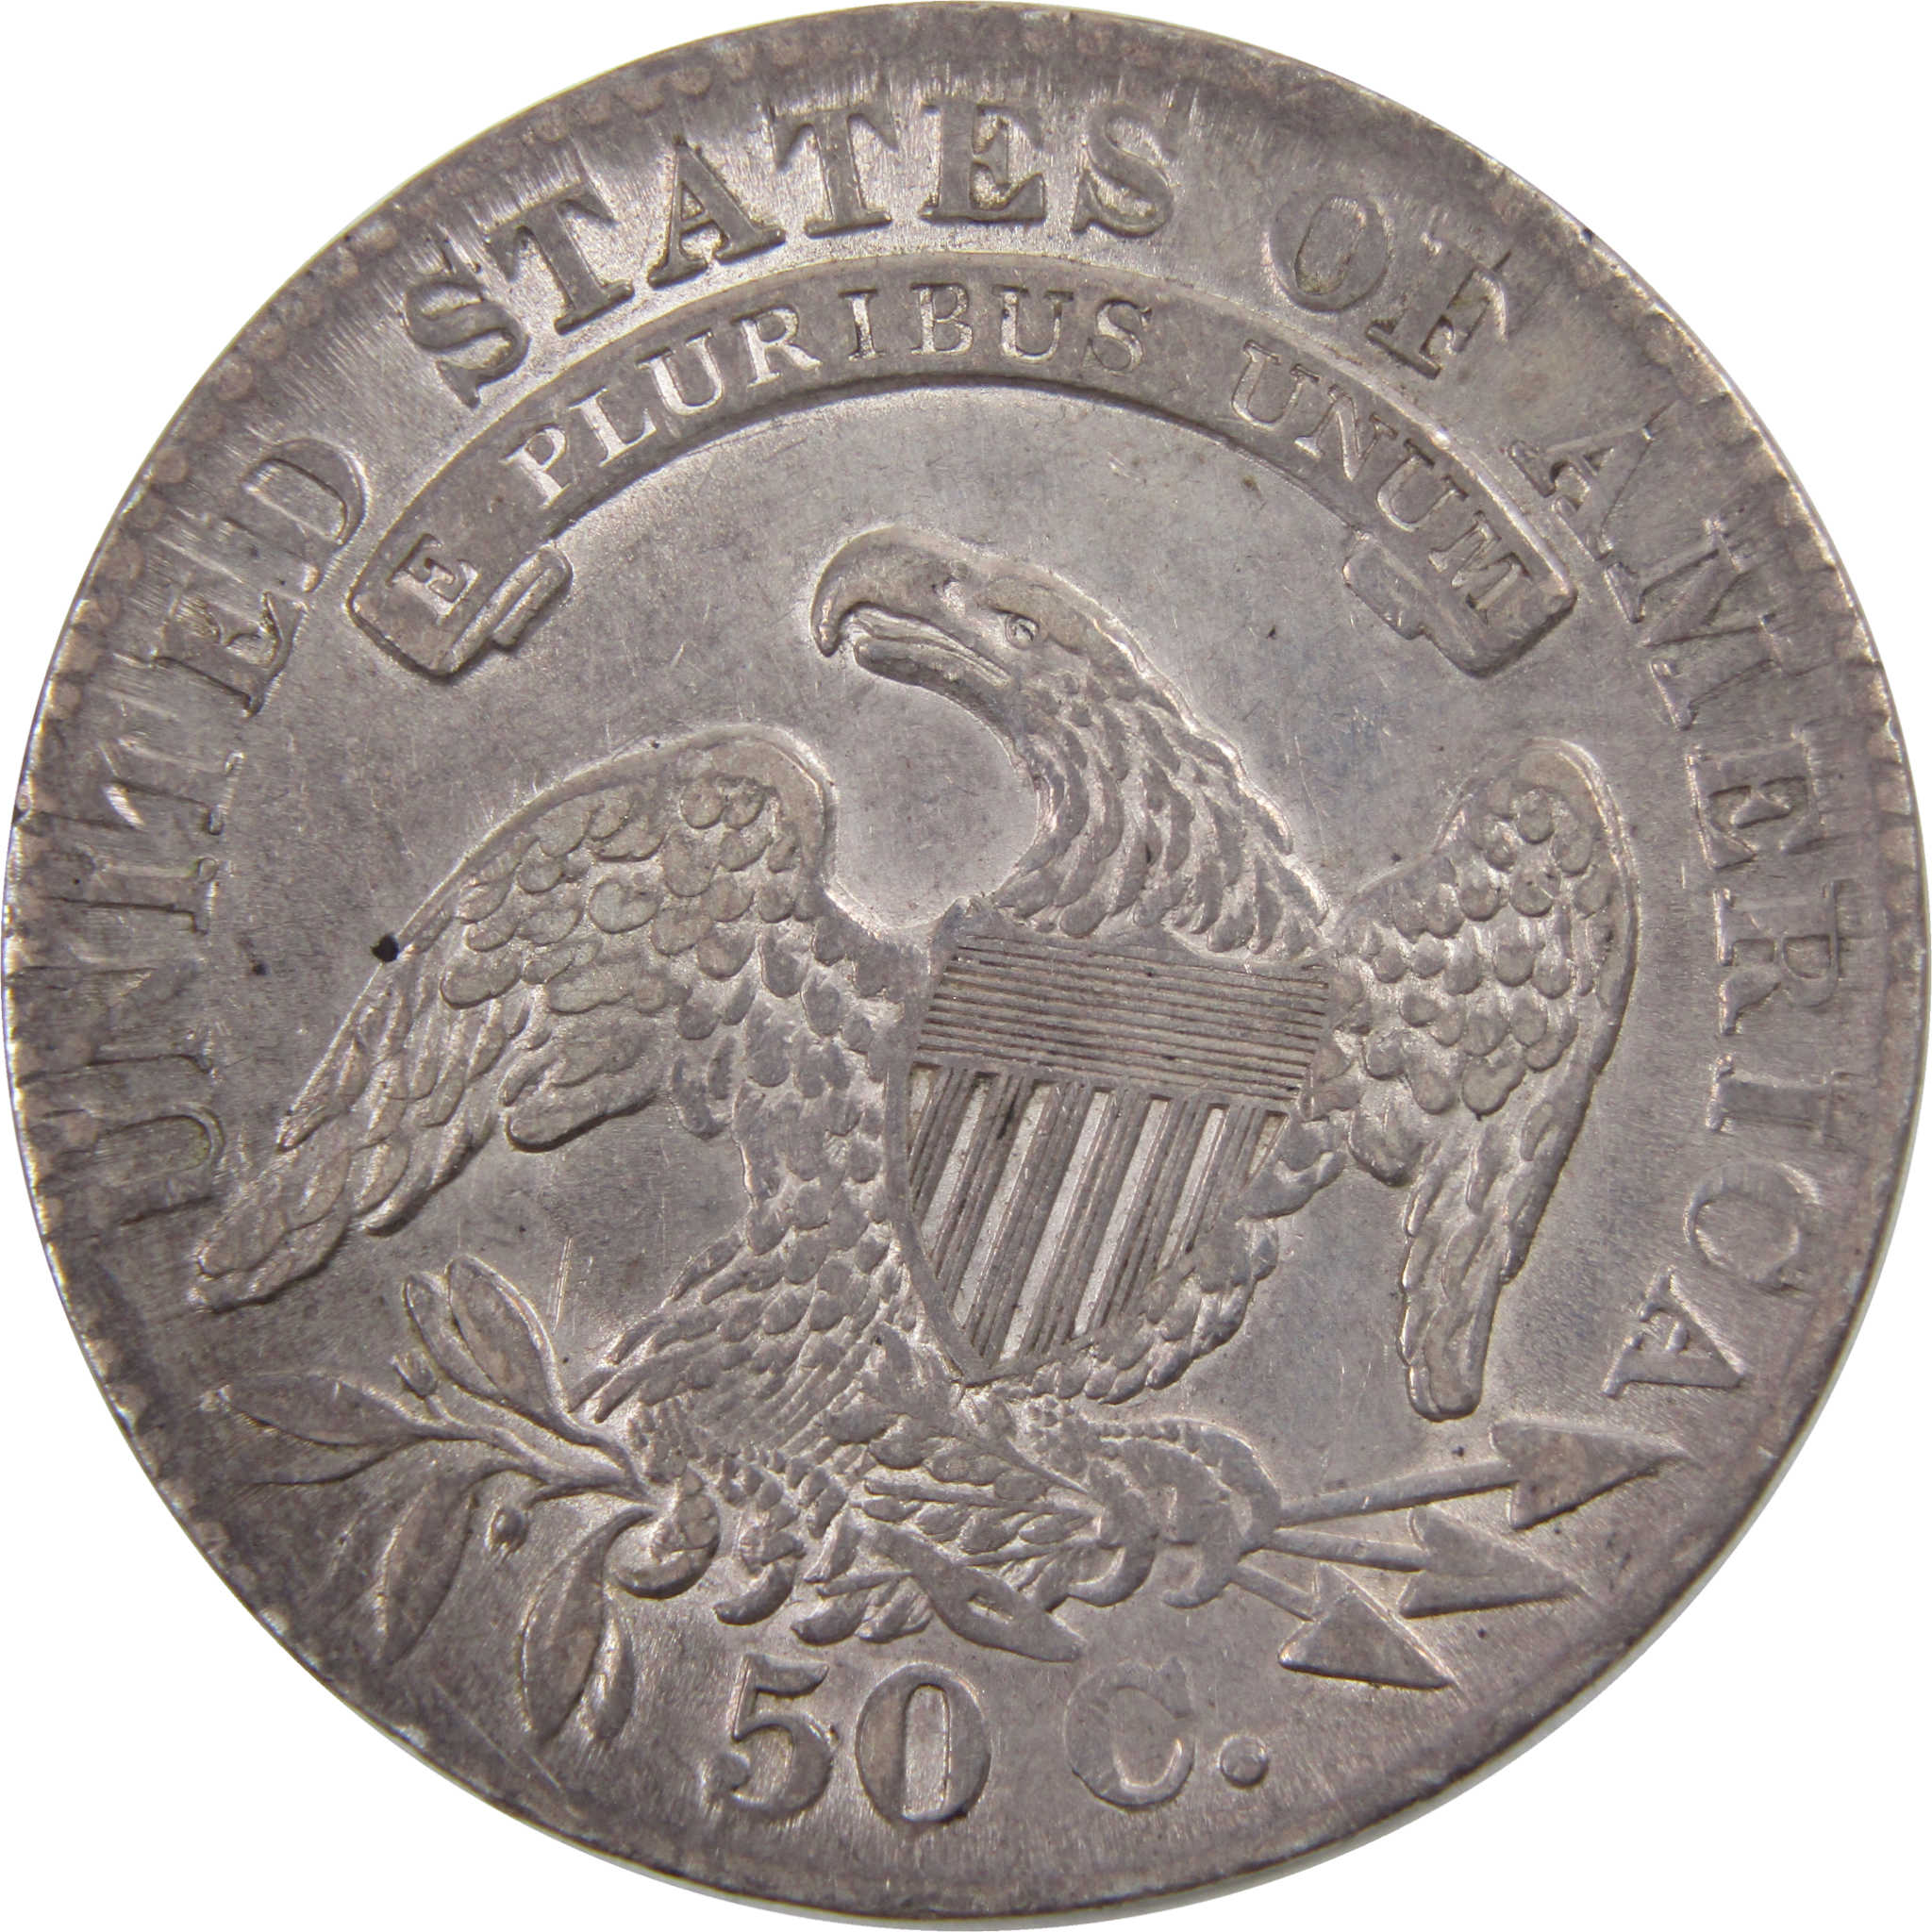 1833 Capped Bust Half Dollar XF Extremely Fine Silver 50c SKU:I3775